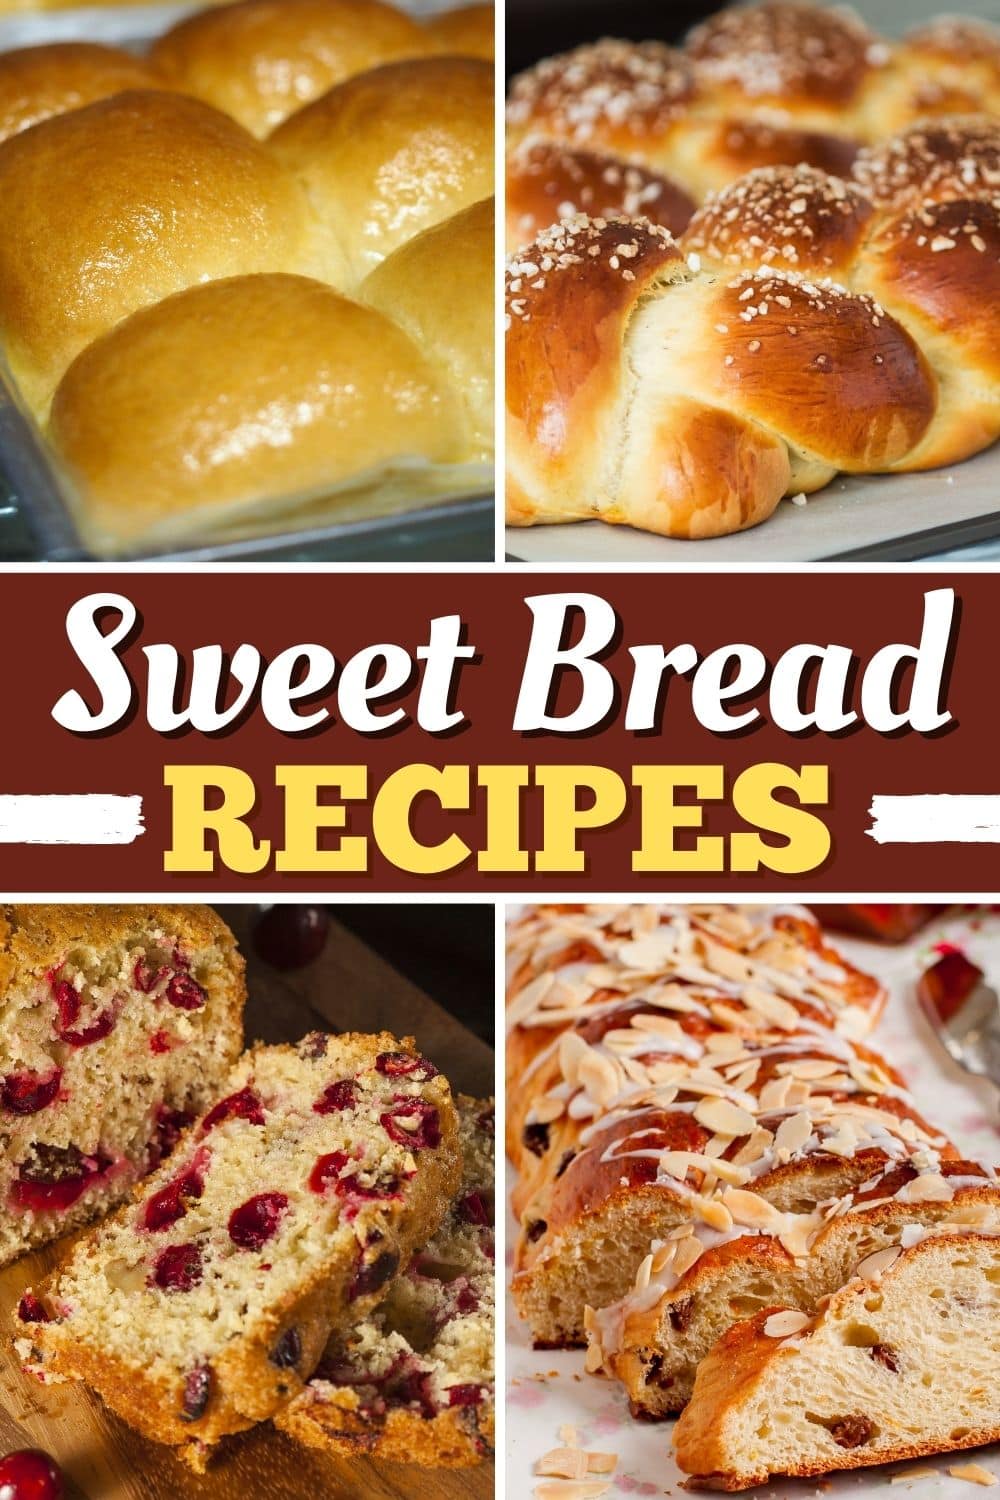 25 Best Sweet Bread Recipes - Insanely Good